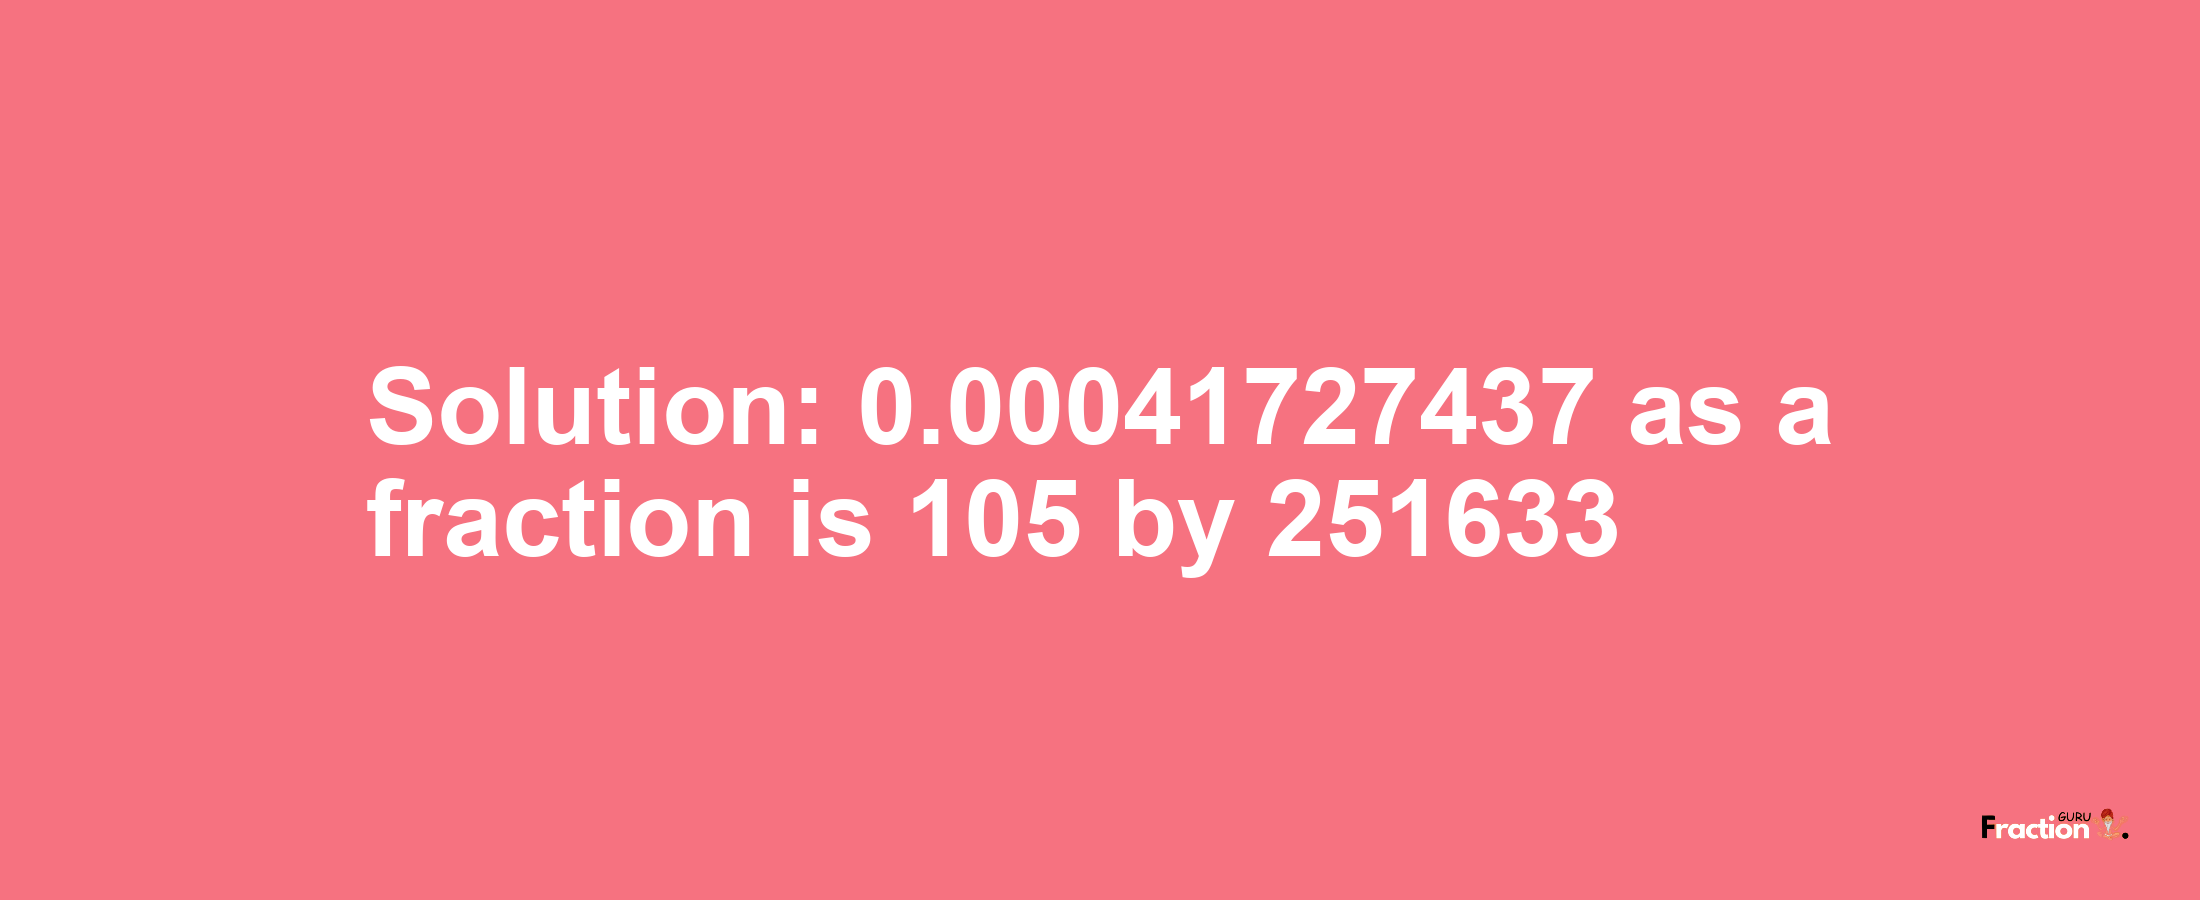 Solution:0.00041727437 as a fraction is 105/251633